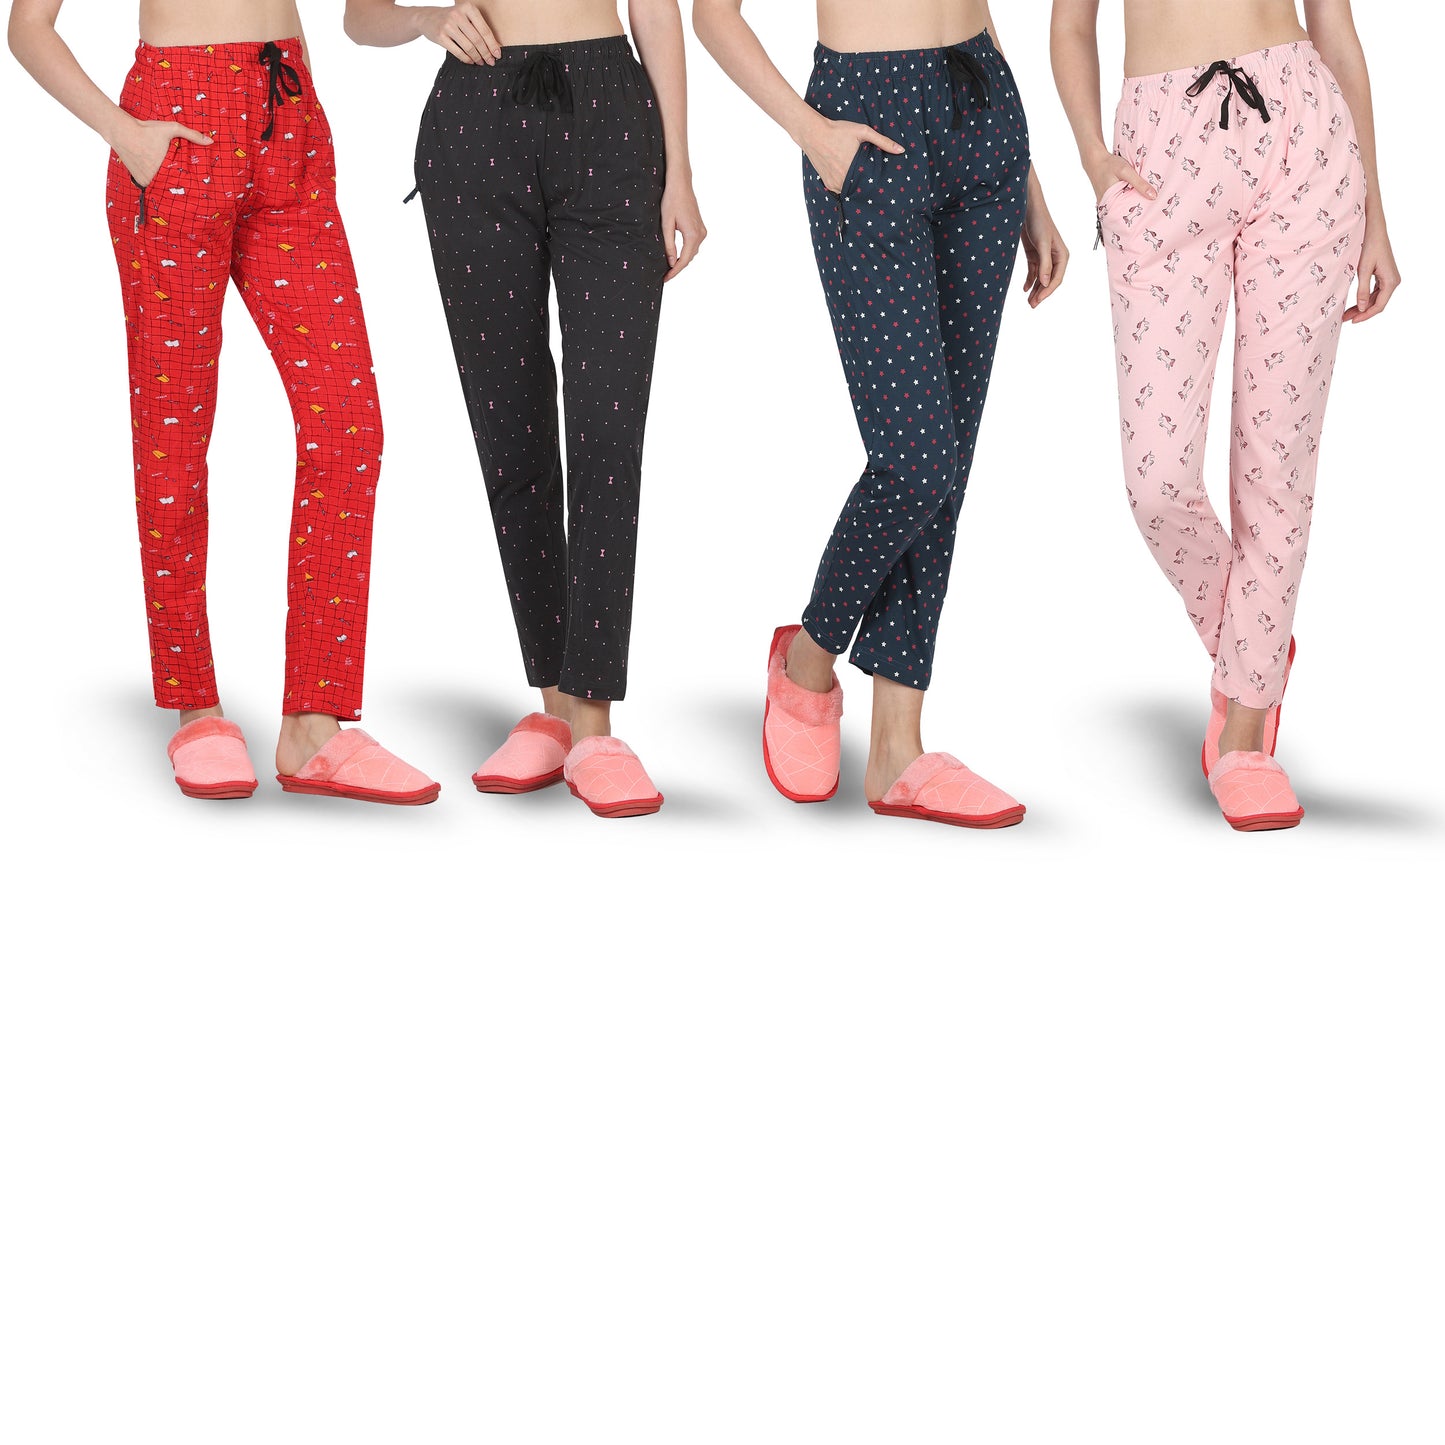 Eazy Women's Printed Lower - Pack of 4 - Bright Red, Charcoal Grey, Pine Green & Light Pink